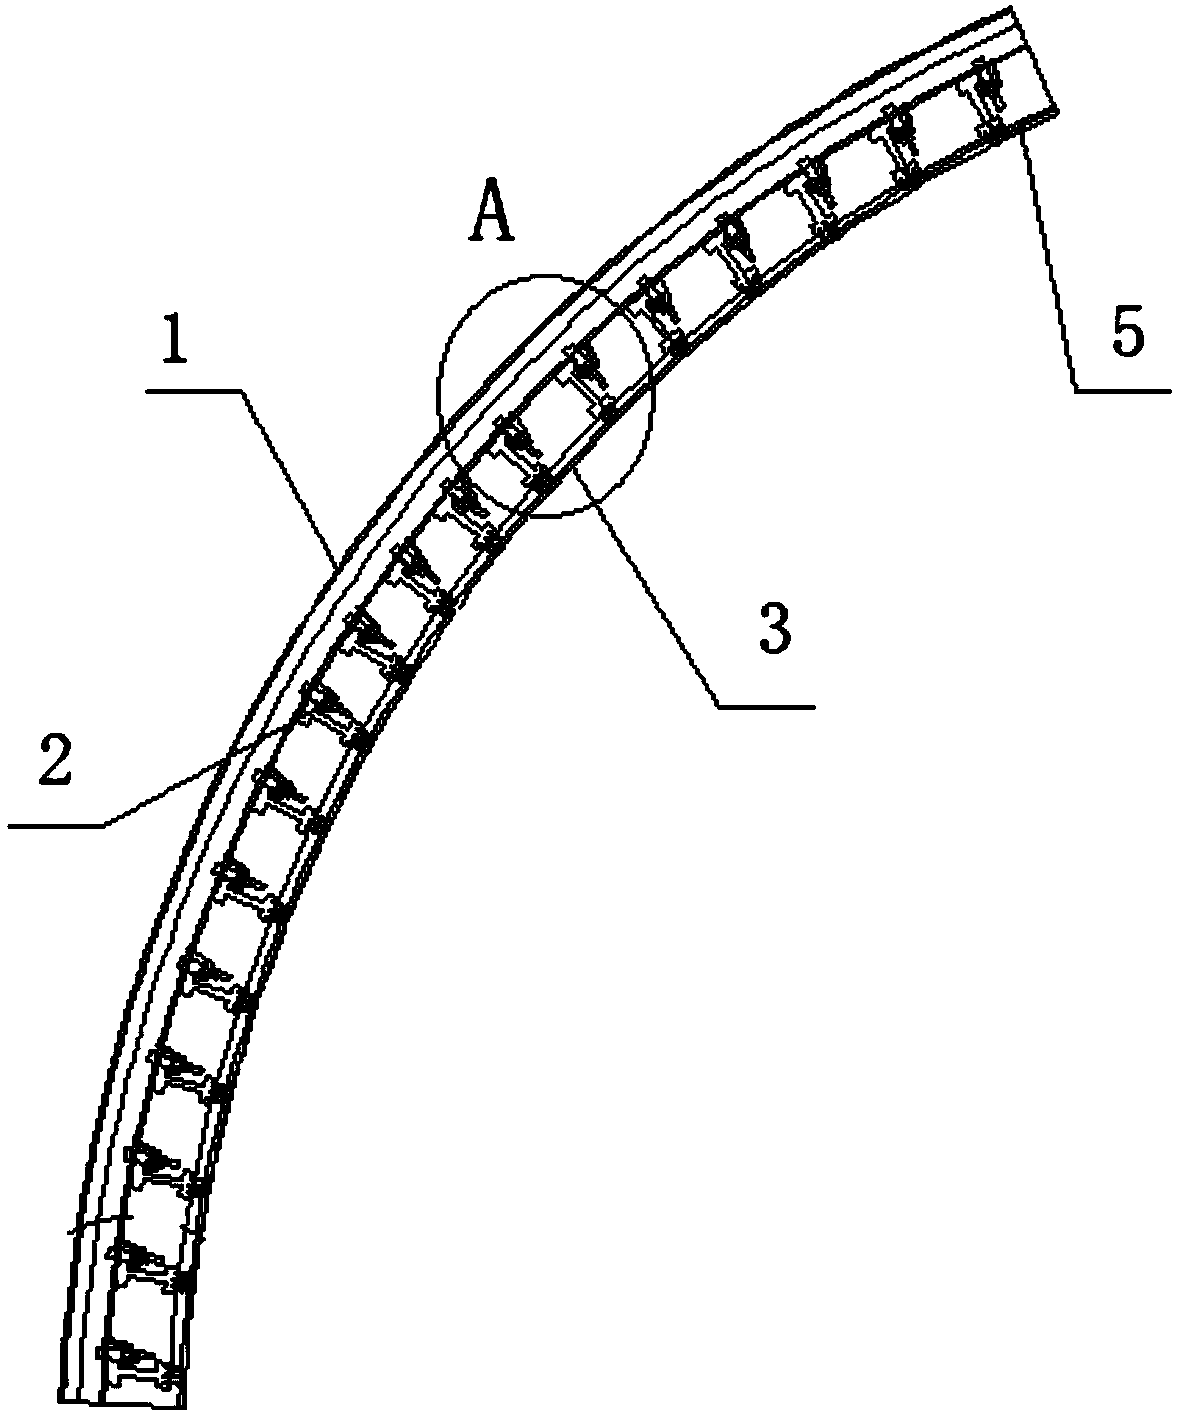 Arc-shaped backing plate used for adjusting curved formwork and mounting process thereof